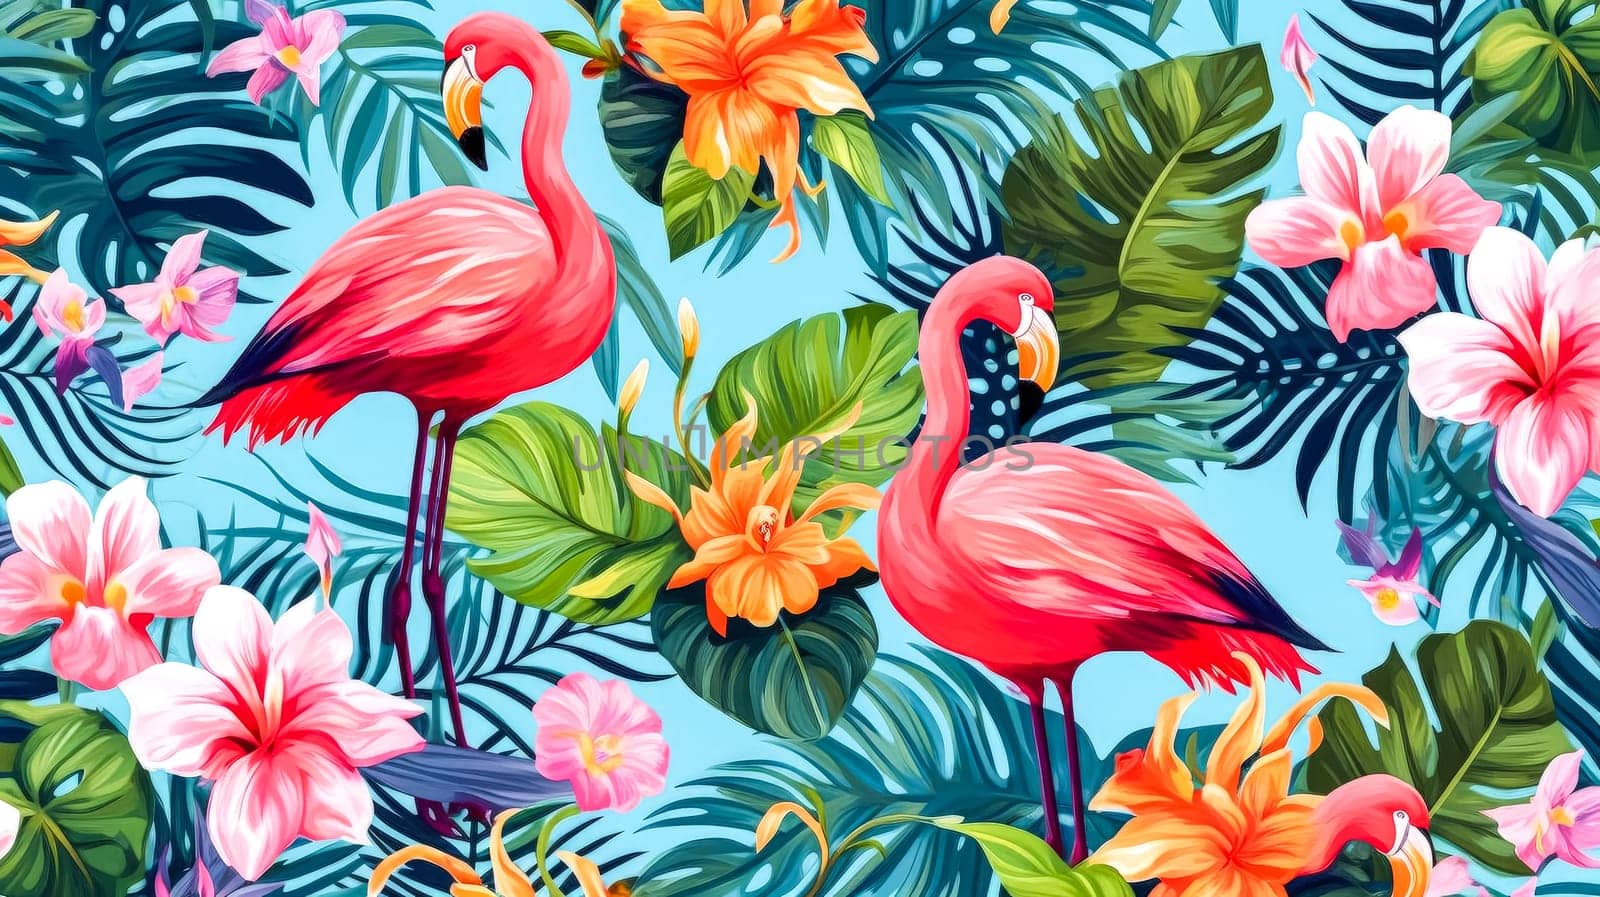 Transform your designs into a tropical paradise with our vibrant summer background. by Alla_Morozova93